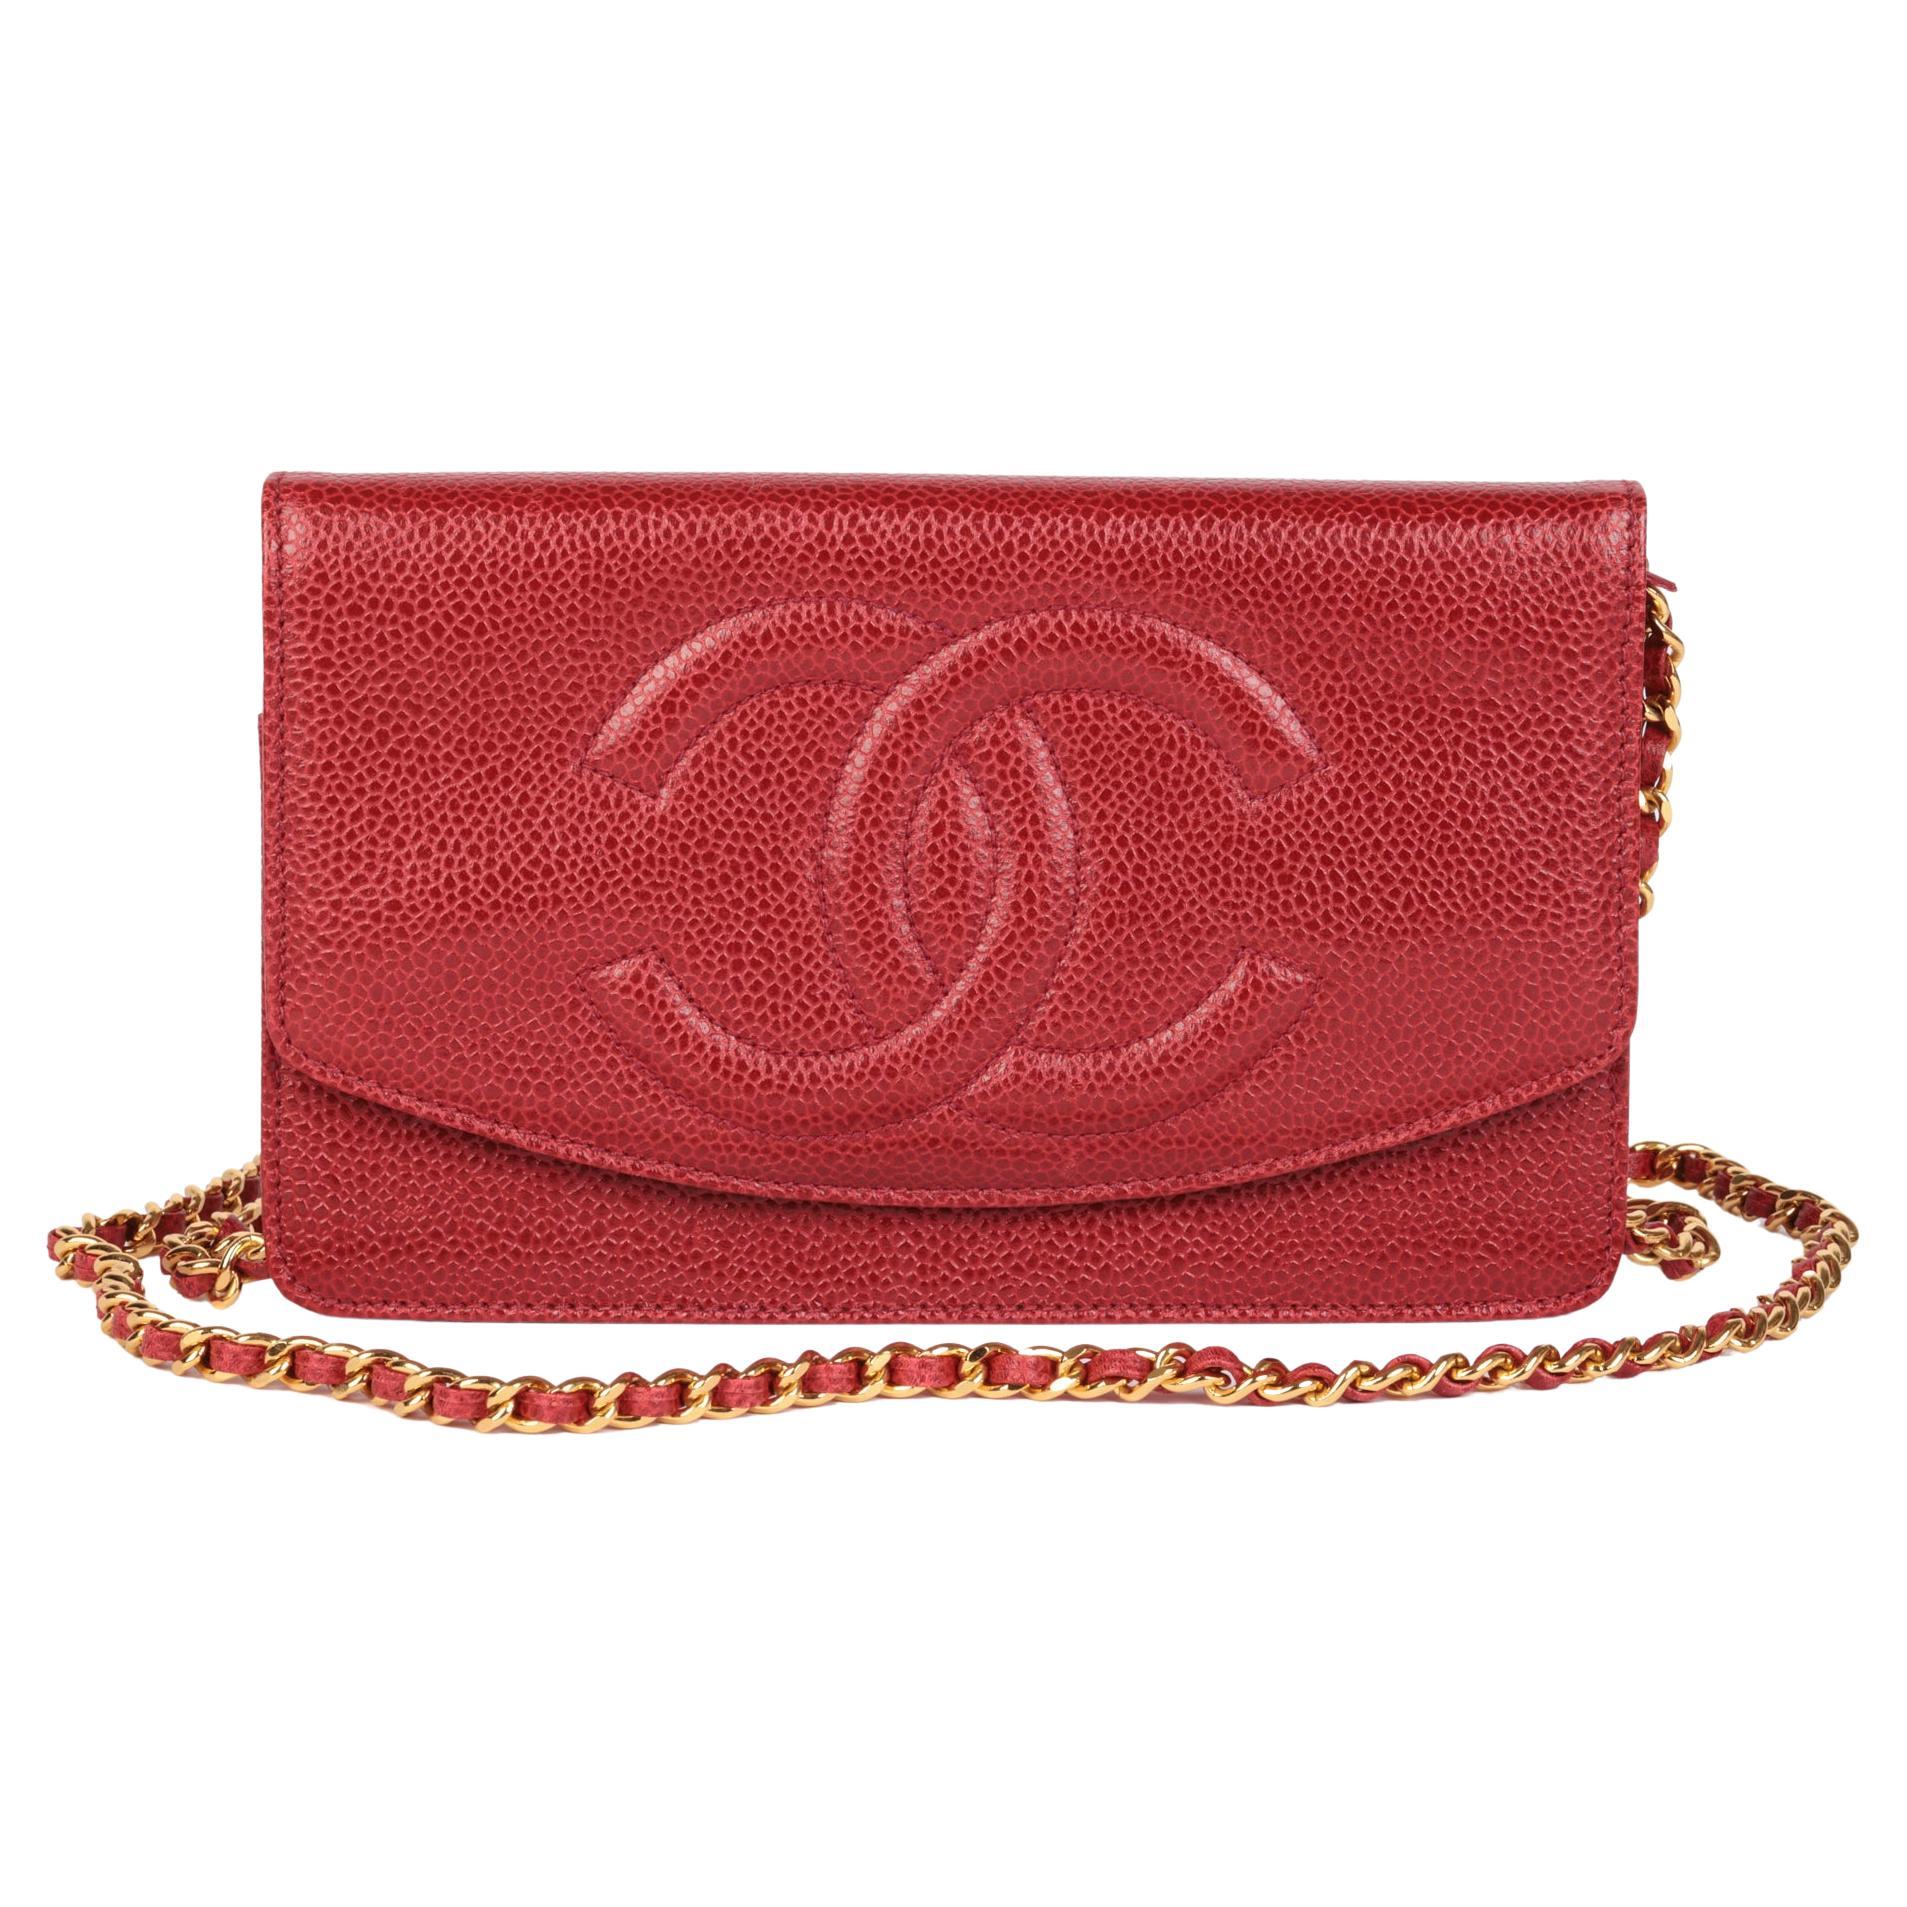 camellia wallet on chain chanel